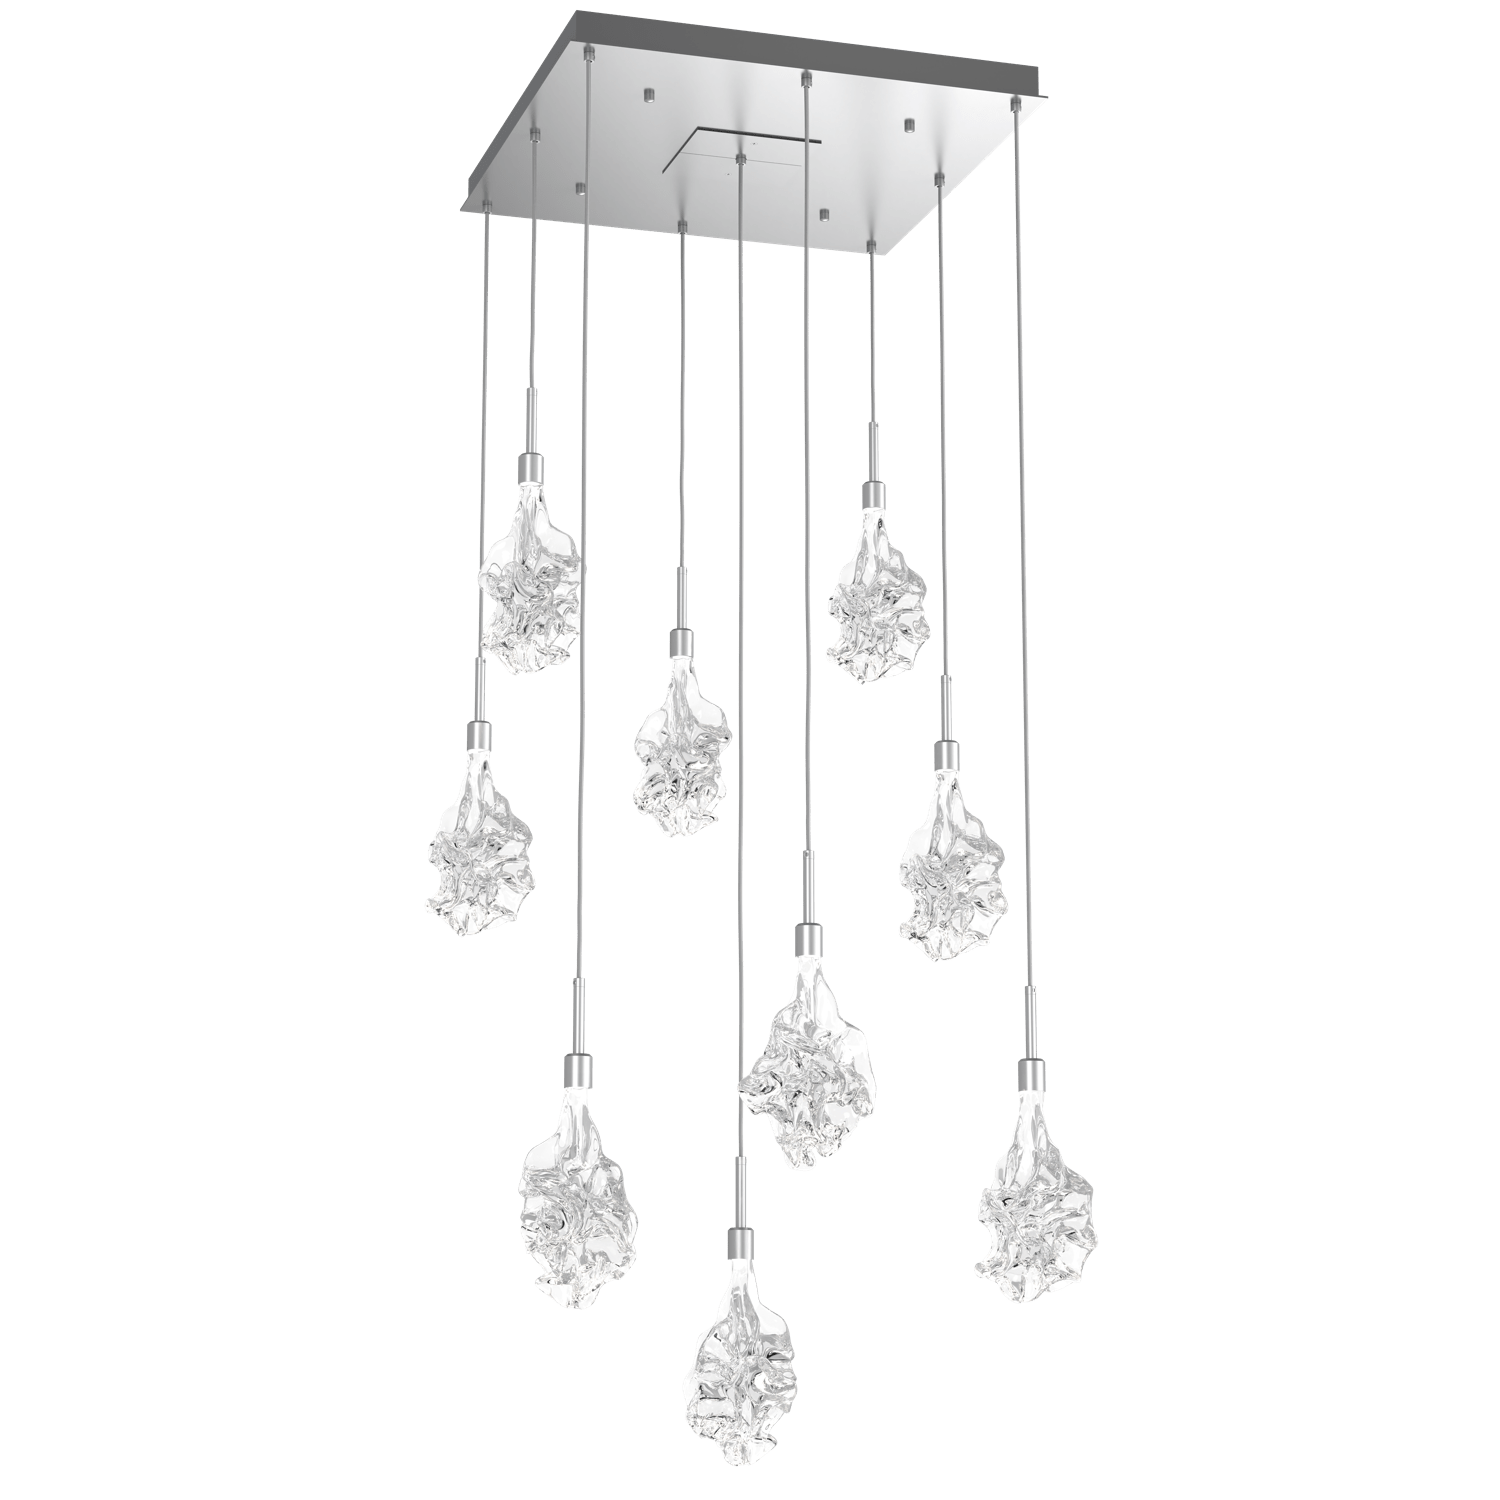 CHB0059-09-CS-Hammerton-Studio-Blossom-9-light-square-pendant-chandelier-with-classic-silver-finish-and-clear-handblown-crystal-glass-shades-and-LED-lamping